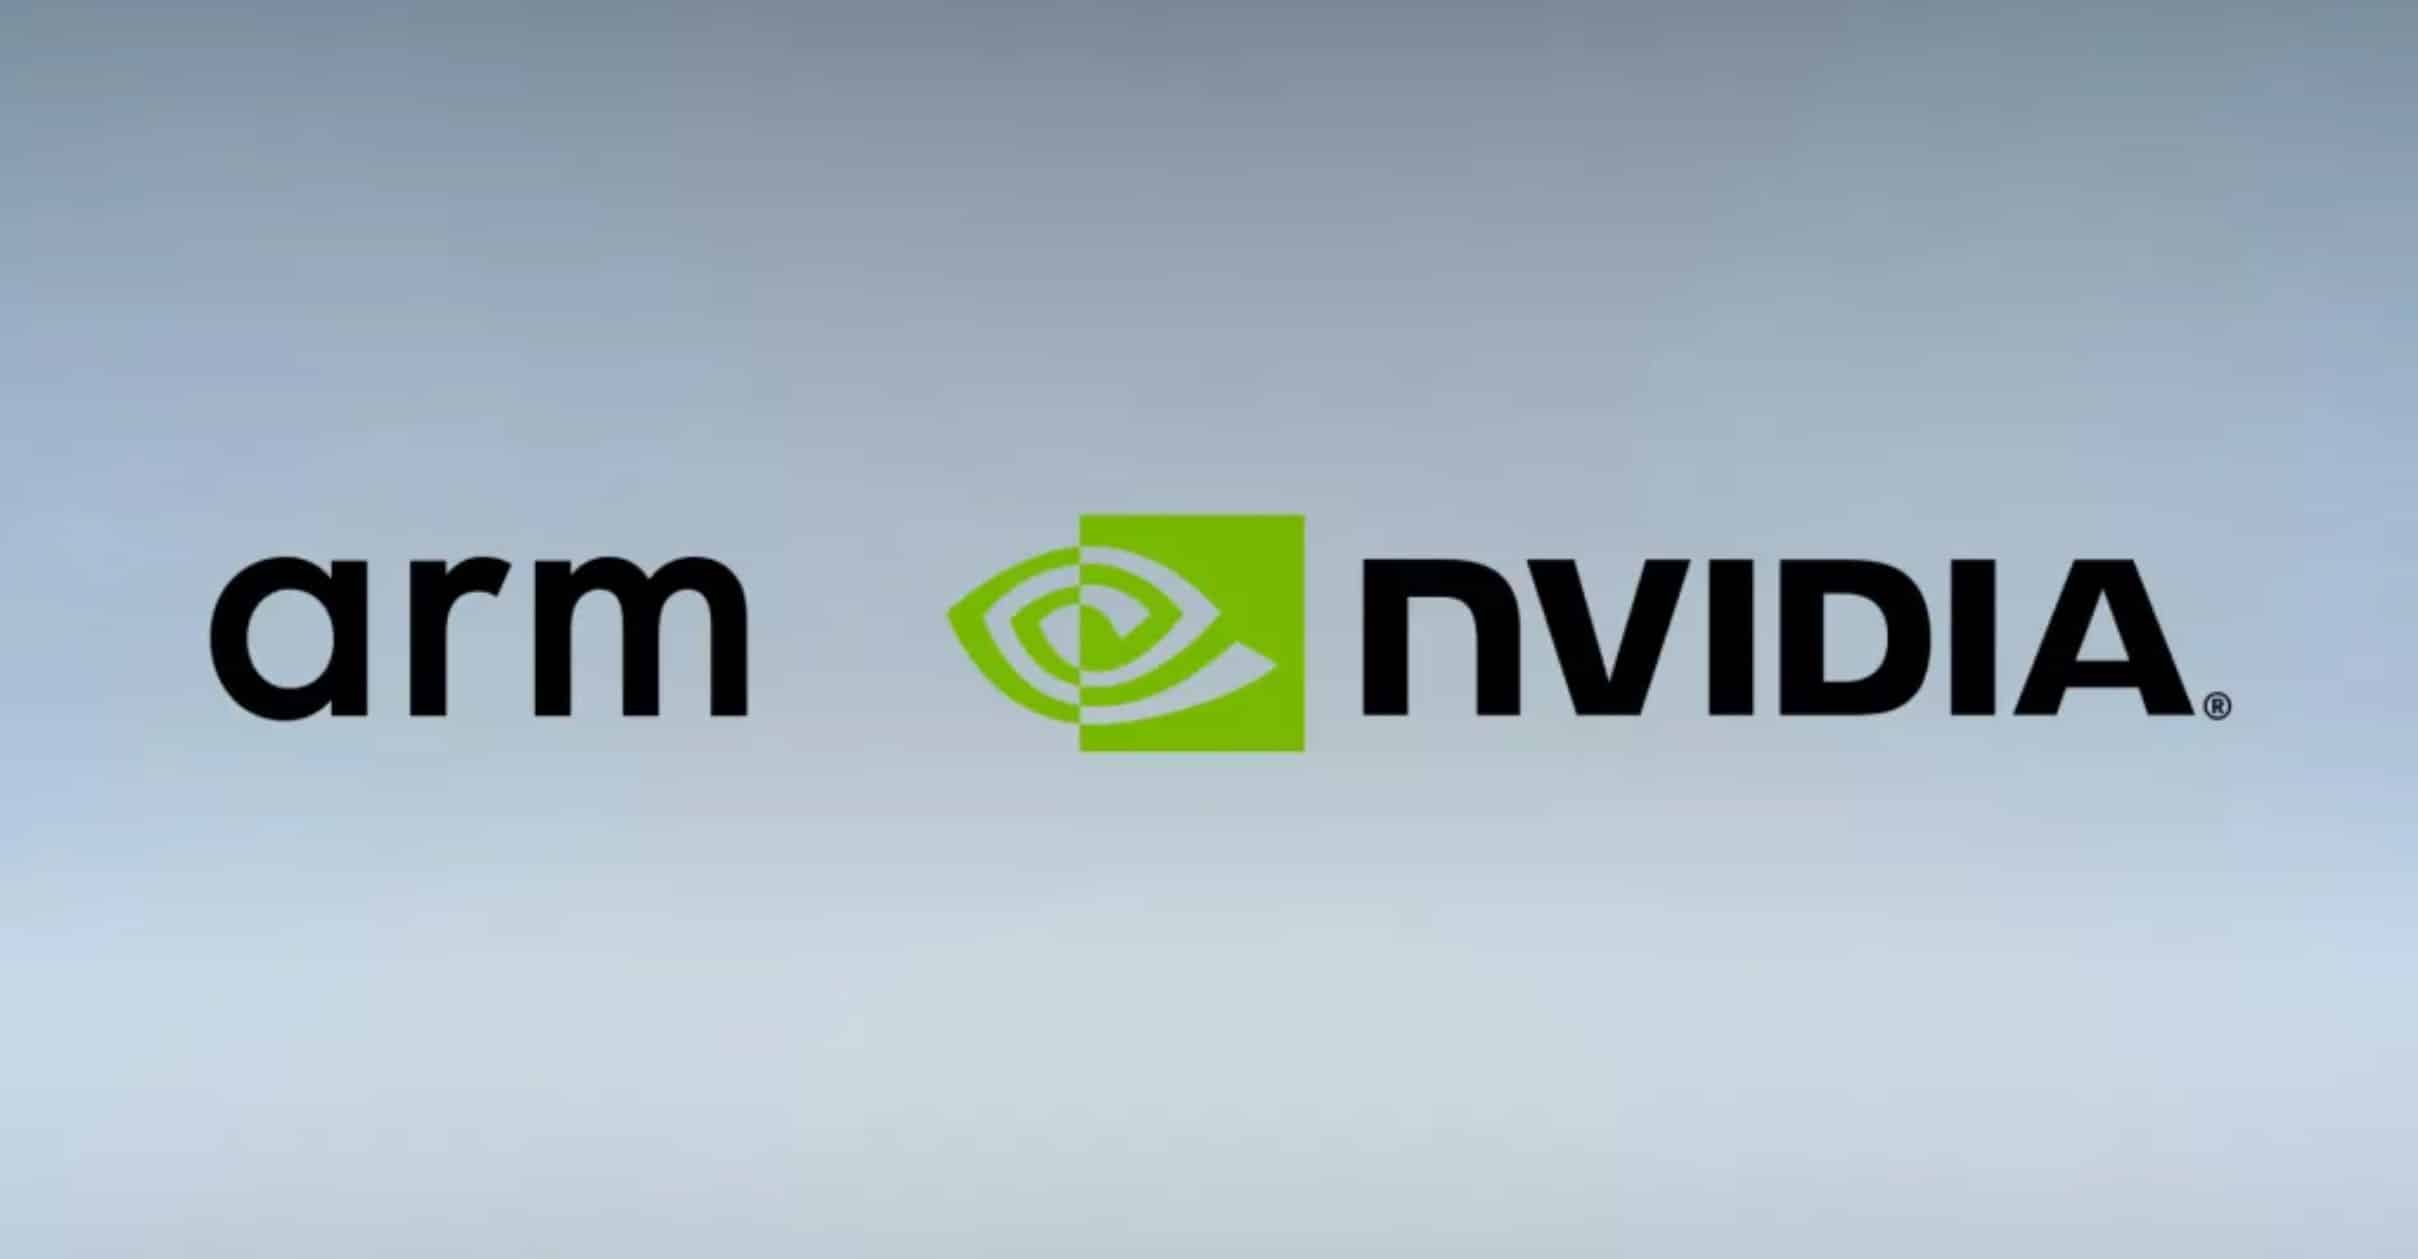 NVIDIA and the ARM architecture.  The company has announced its plans